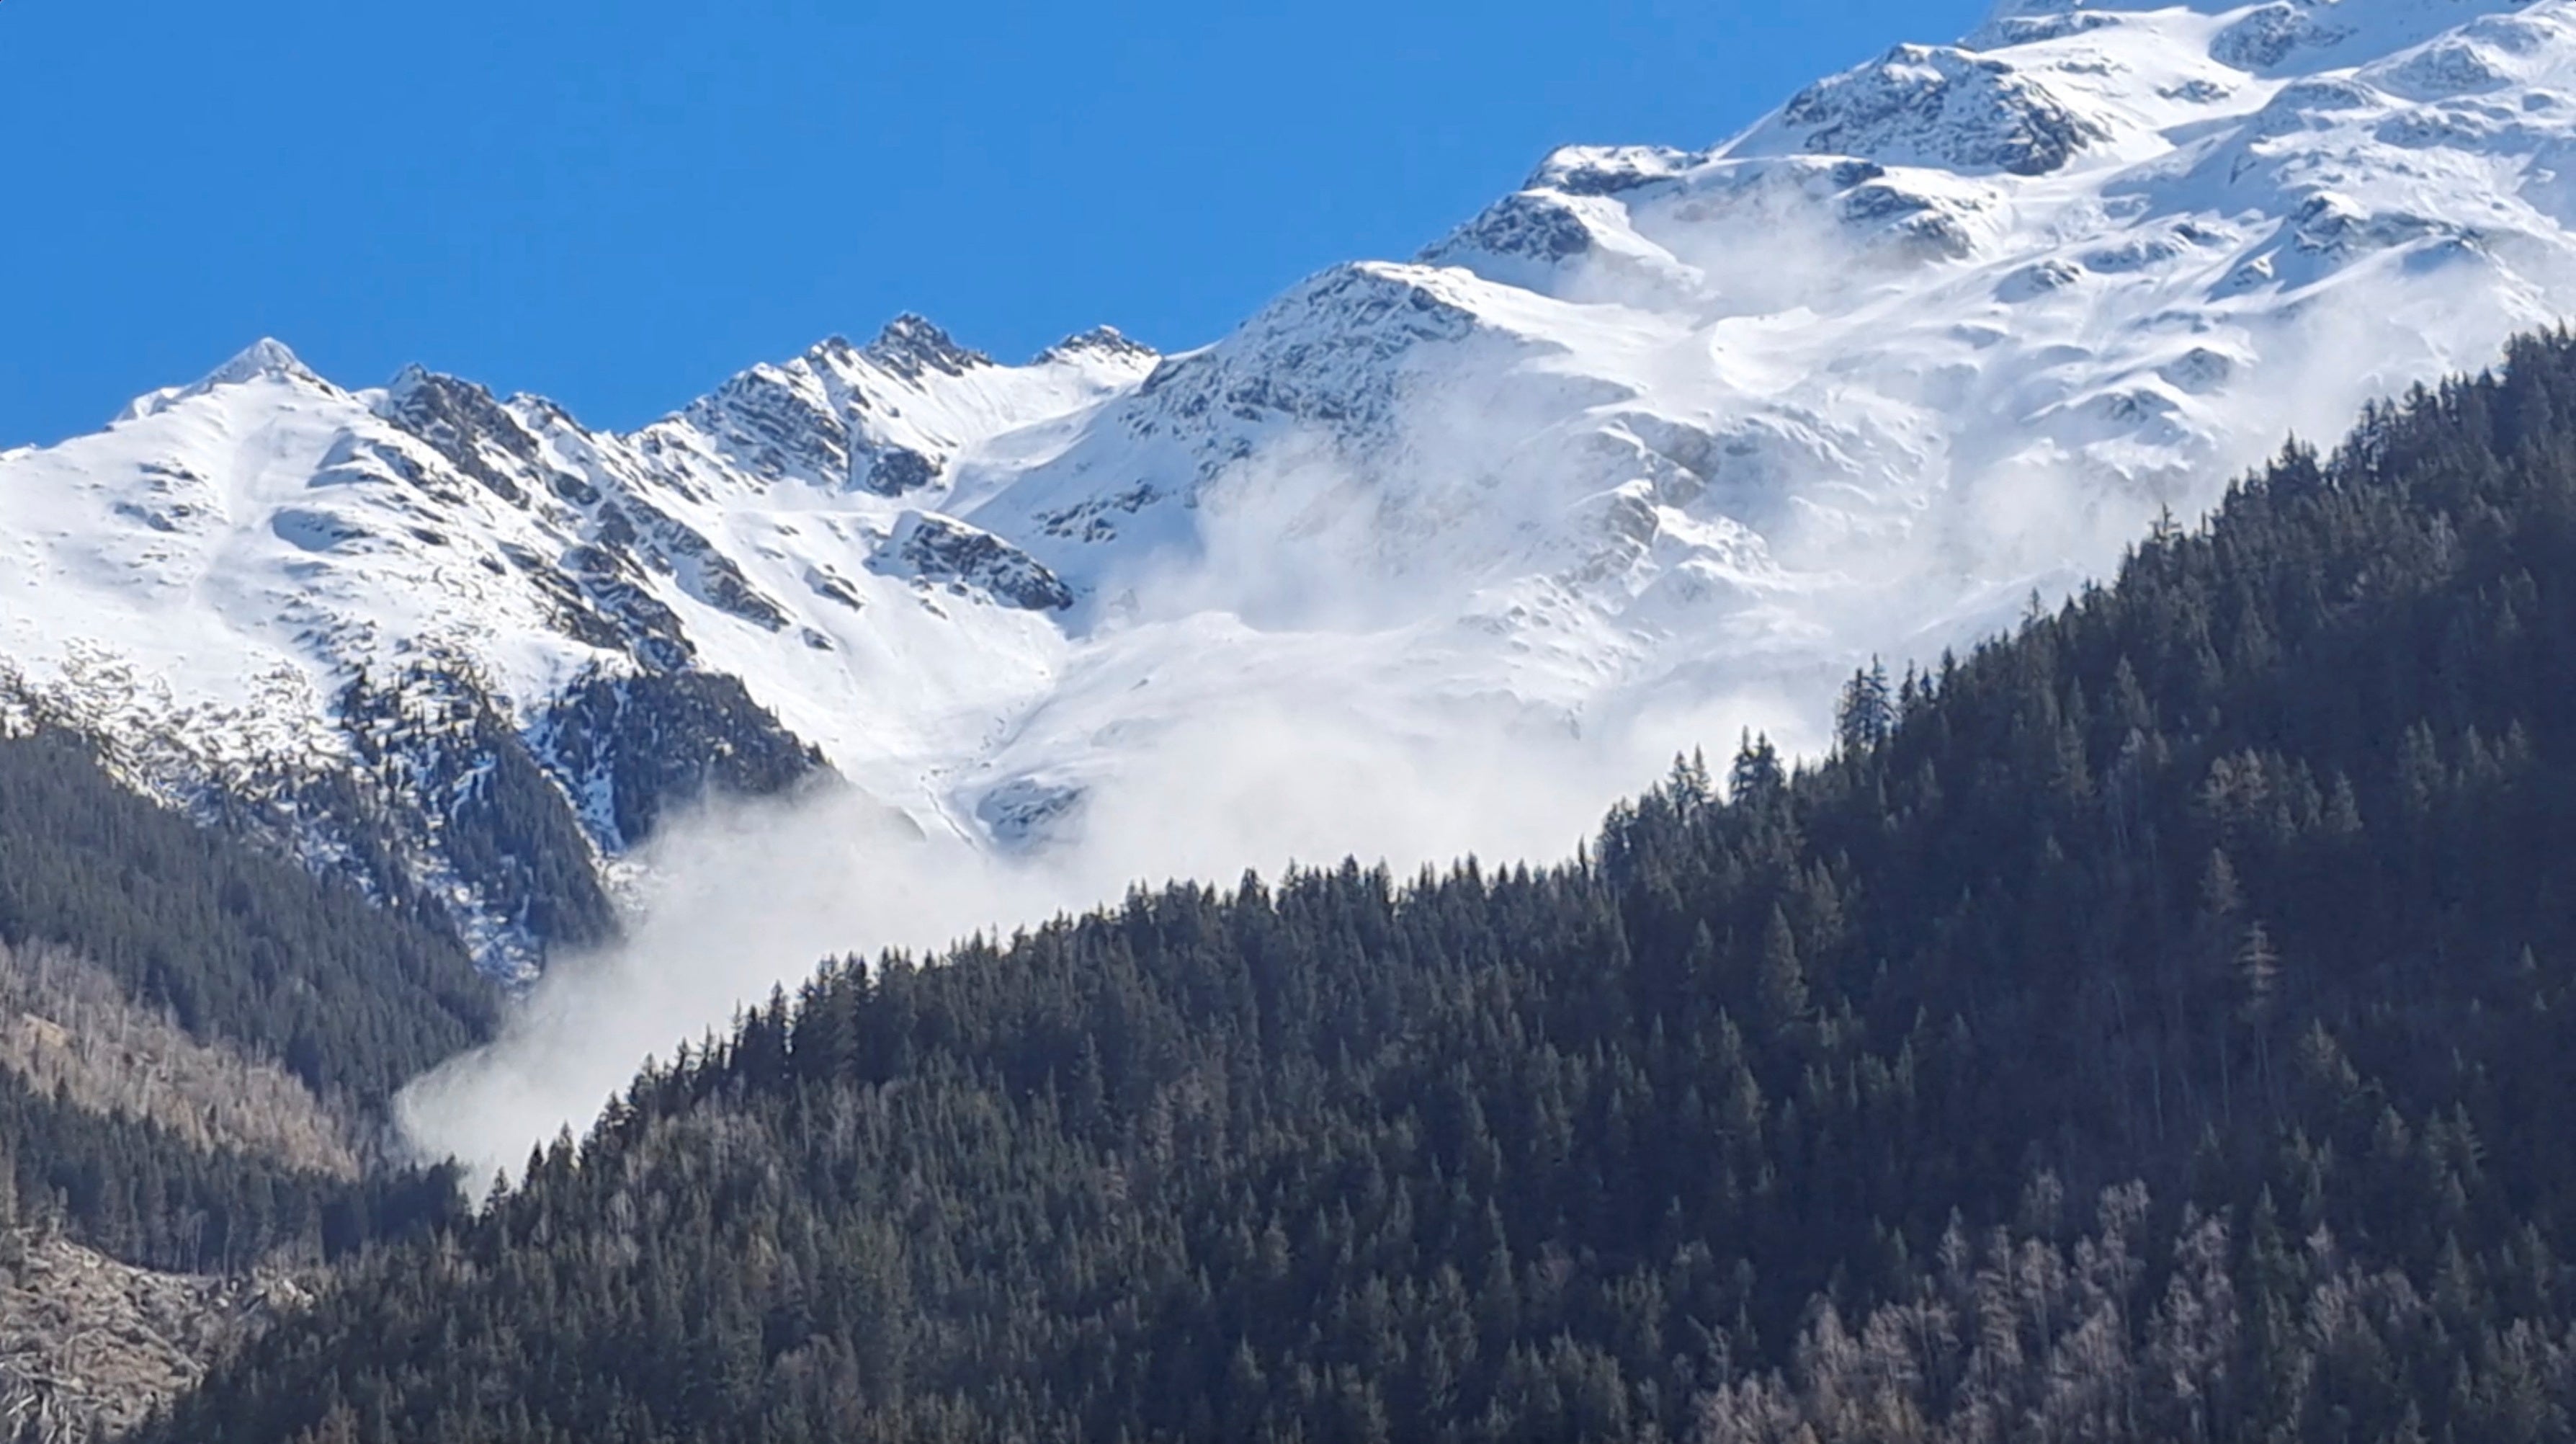 Sunday’s avalanche was estimated to be 1km long by 100m wide